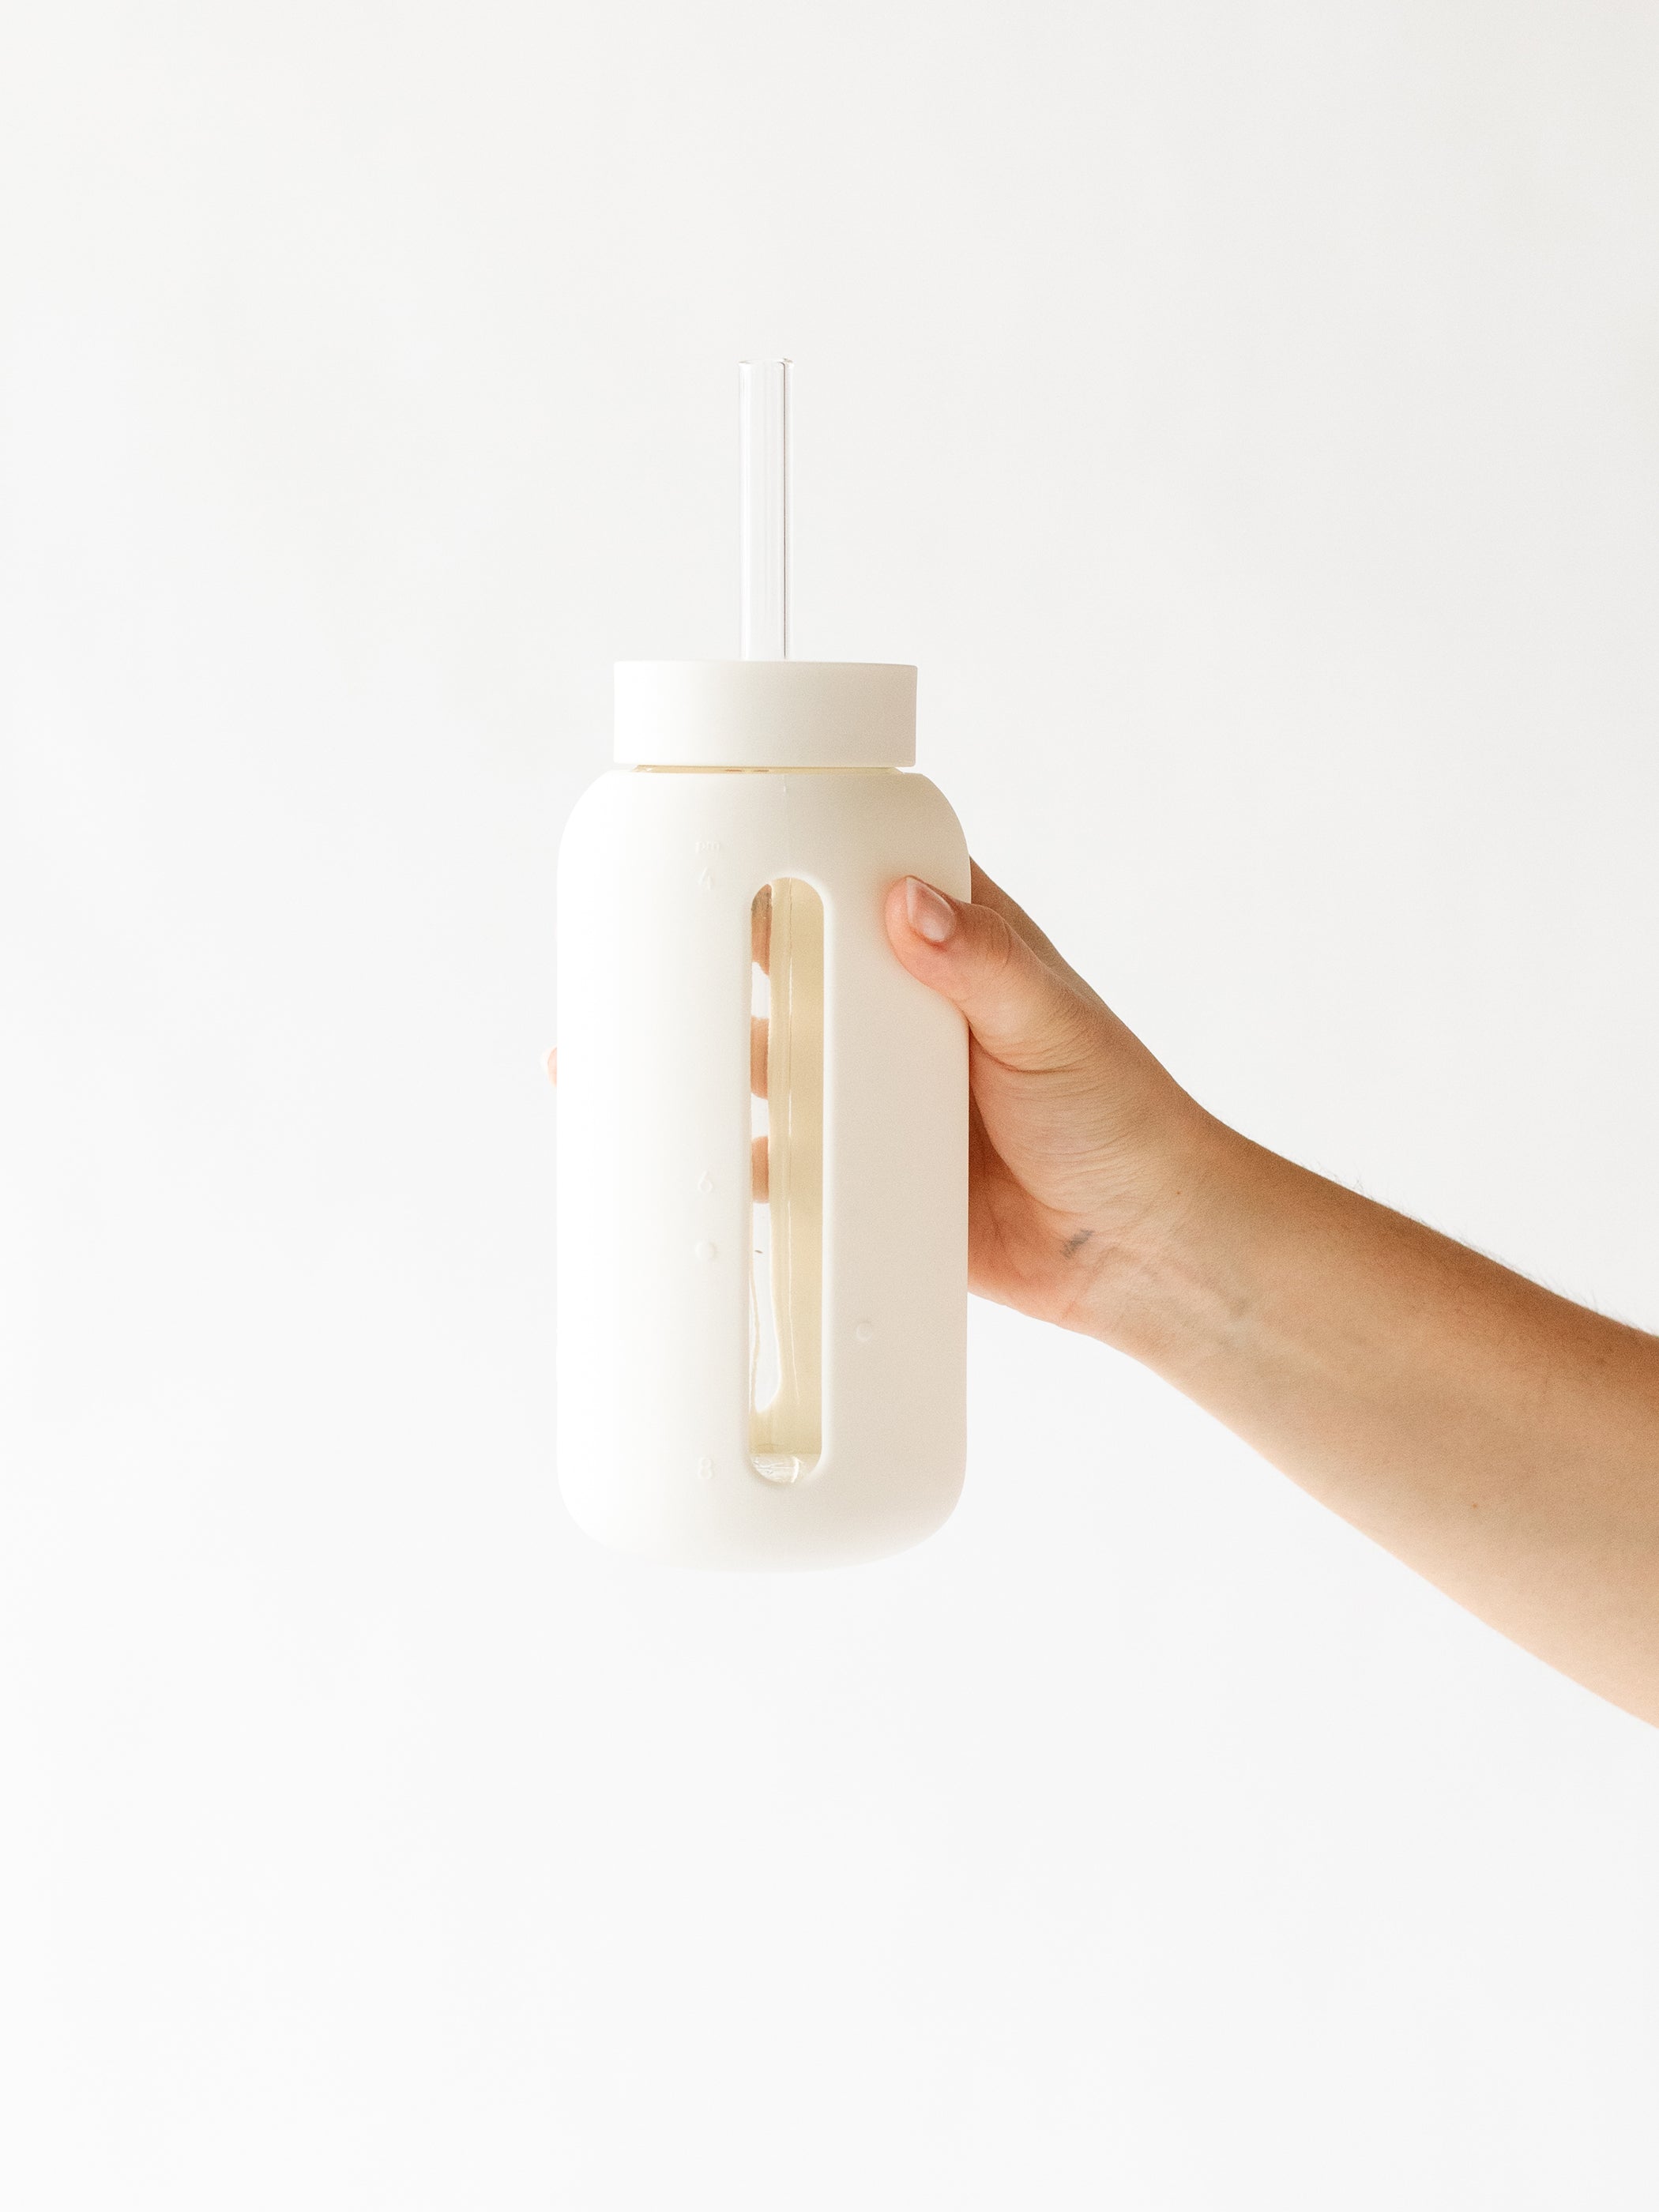 SAND Bink DAY BOTTLE, The Hydration Tracking Water Bottle